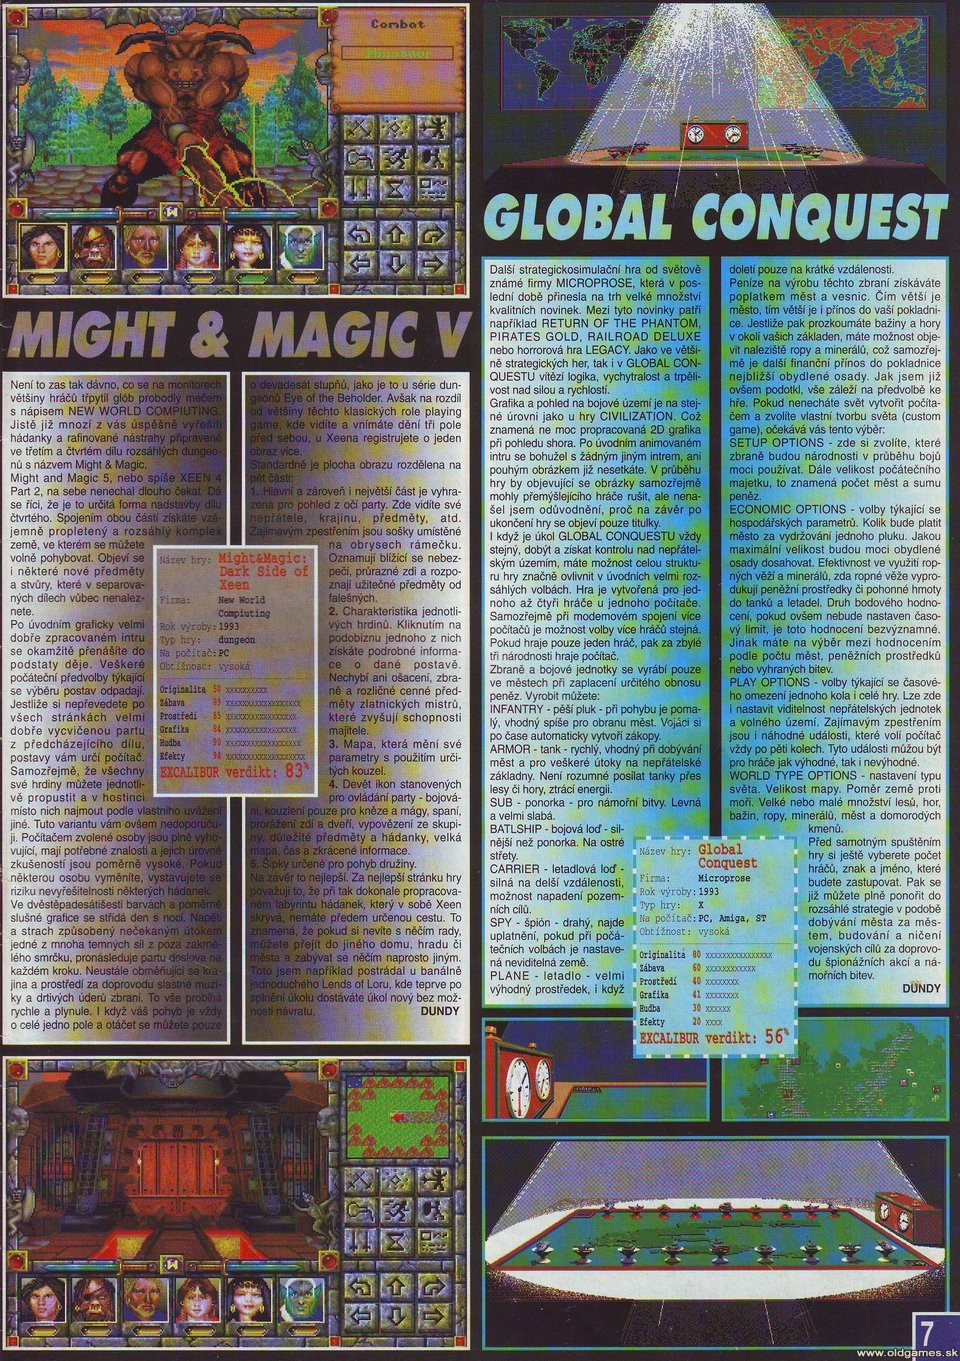 Might and Magic 5: Dark Side of Xeen, Global Conquest